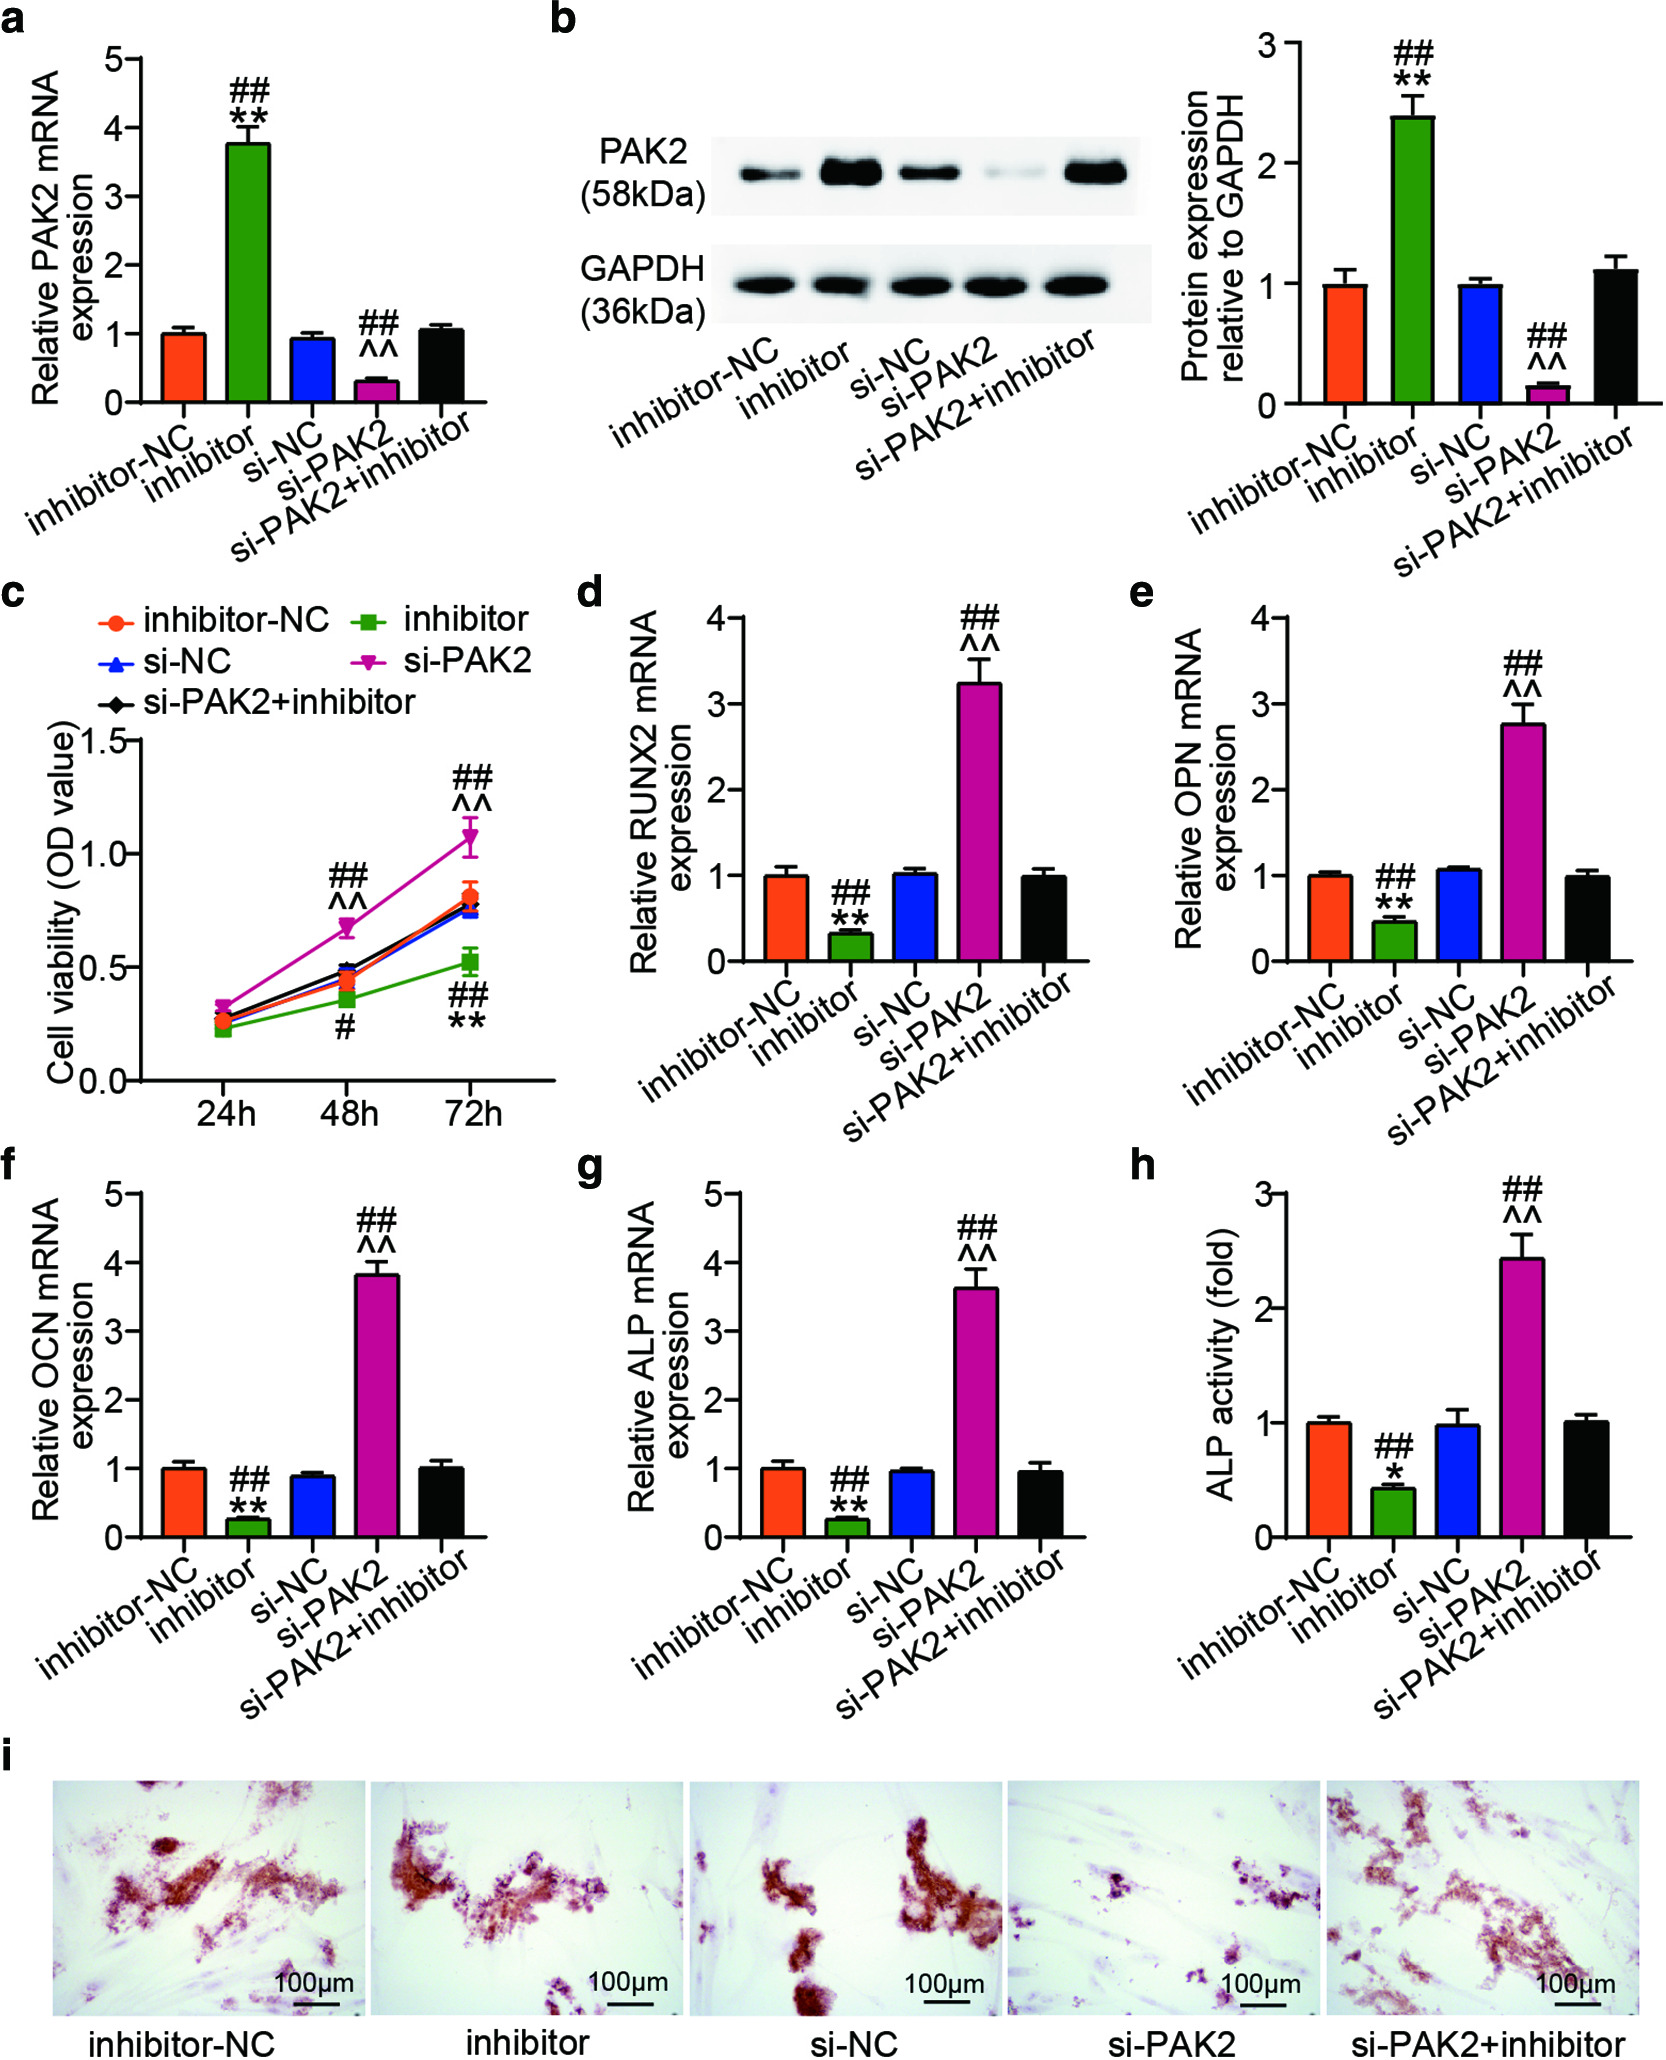 Fig. 6 
            MicroRNA (miR)-126-5p regulated osteoblast differentiation of human bone marrow-derived mesenchymal stem cells (hBMSCs) by targeting group I Pak family member p21-activated kinase 2 (PAK2). hBMSCs were co-transfected hBMSCs with inhibitor-NC, negative control (si-NC), miR-126-5p inhibitor (inhibitor), and si-PAK2 or si-PAK2 + miR-126-5p inhibitor (si-PAK2 + inhibitor). a) and b) PAK expression was measured by a) quantitative real-time polymerase chain reaction (qRT-PCR) and b) western blot. c) Cell proliferation of hBMSCs was measured by Cell Counting Kit-8 (CCK-8) assay. d) to g) The expression level of osteogenesis-related genes (Runt-related transcription factor 2 (RUNX2), osteopontin (OPN), osteocalcin (OCN), and alkaline phosphatase (ALP)) detected by qRT-PCR. h) ALP activity was detected by ALP staining and quantification. i) Calcium deposits in hBMSCs were detected by Alizarin red staining. The data represent the mean (standard deviation). *p < 0.05, **p < 0.001 compared with inhibitor-NC, ^^p < 0.001 compared with si-NC, #p < 0.05, ##p < 0.001 compared with si-PAK2+ inhibitor; calculated using one-way analysis of variance. GAPDH, glyceraldehyde 3-phosphate dehydrogenase; mRNA, messenger RNA; OD, optical density.
          